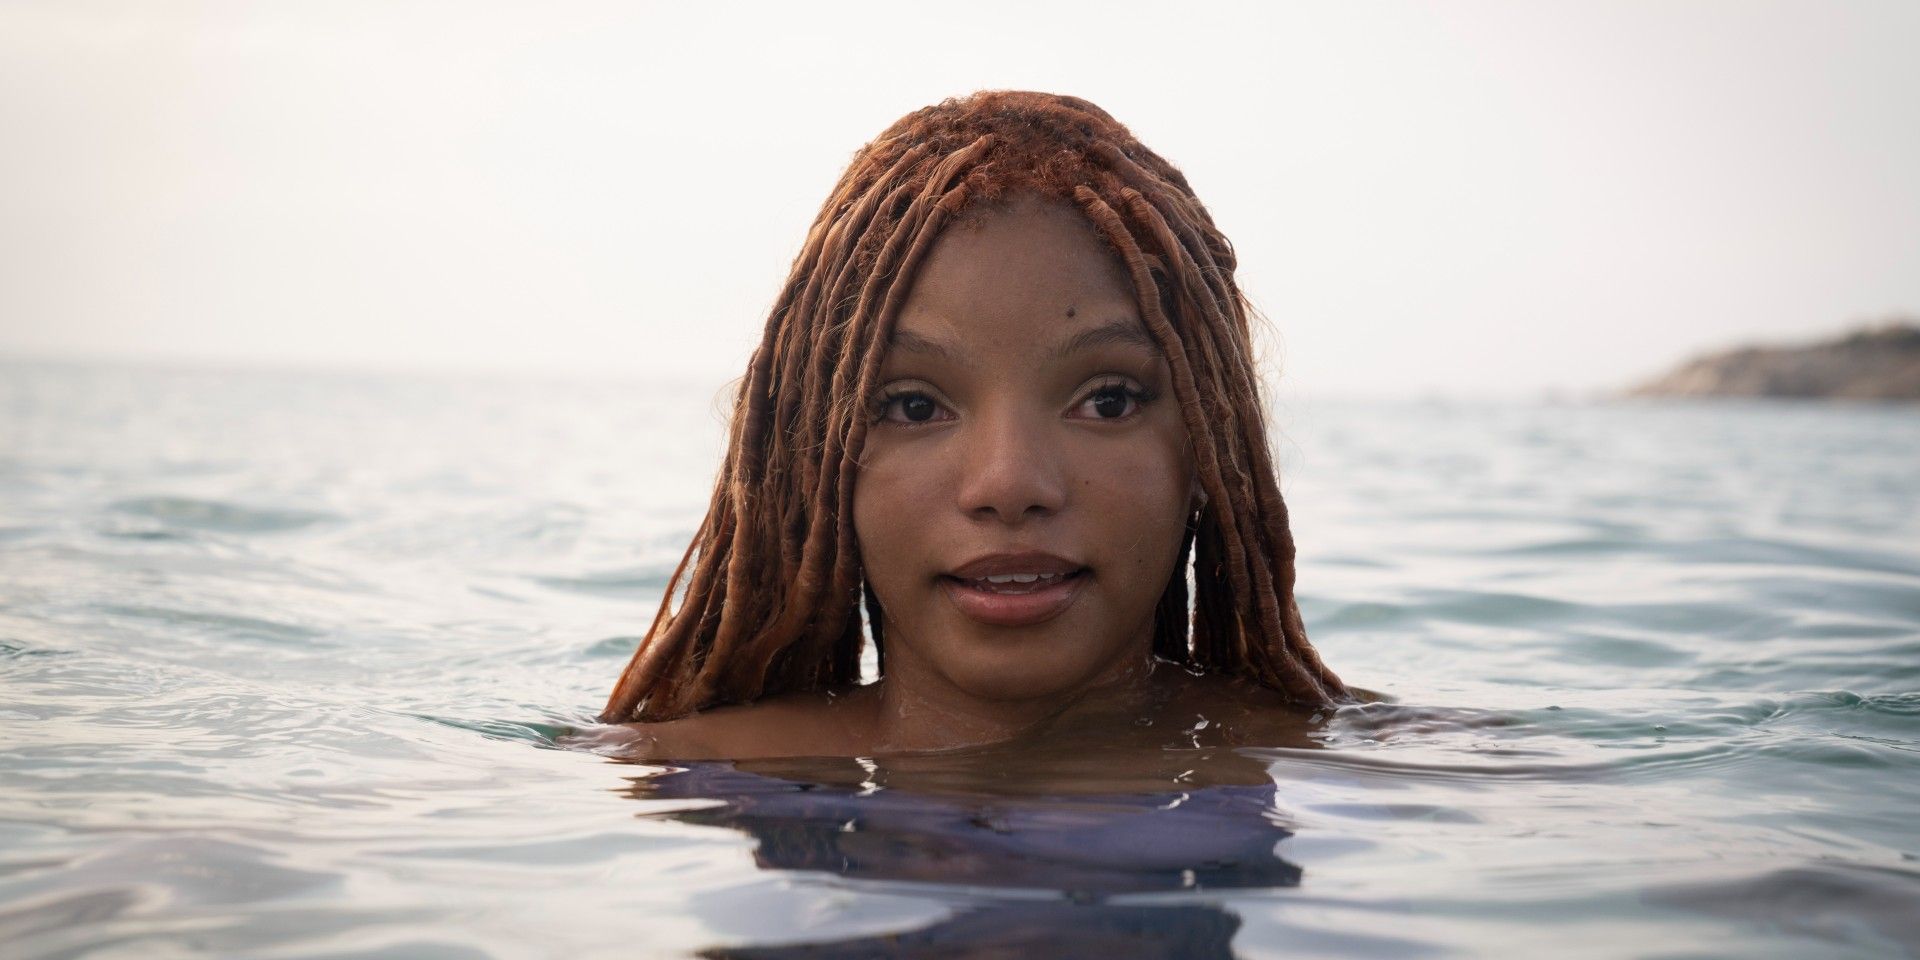 Halle Bailey as Ariel emerging from the water in The Little Mermaid